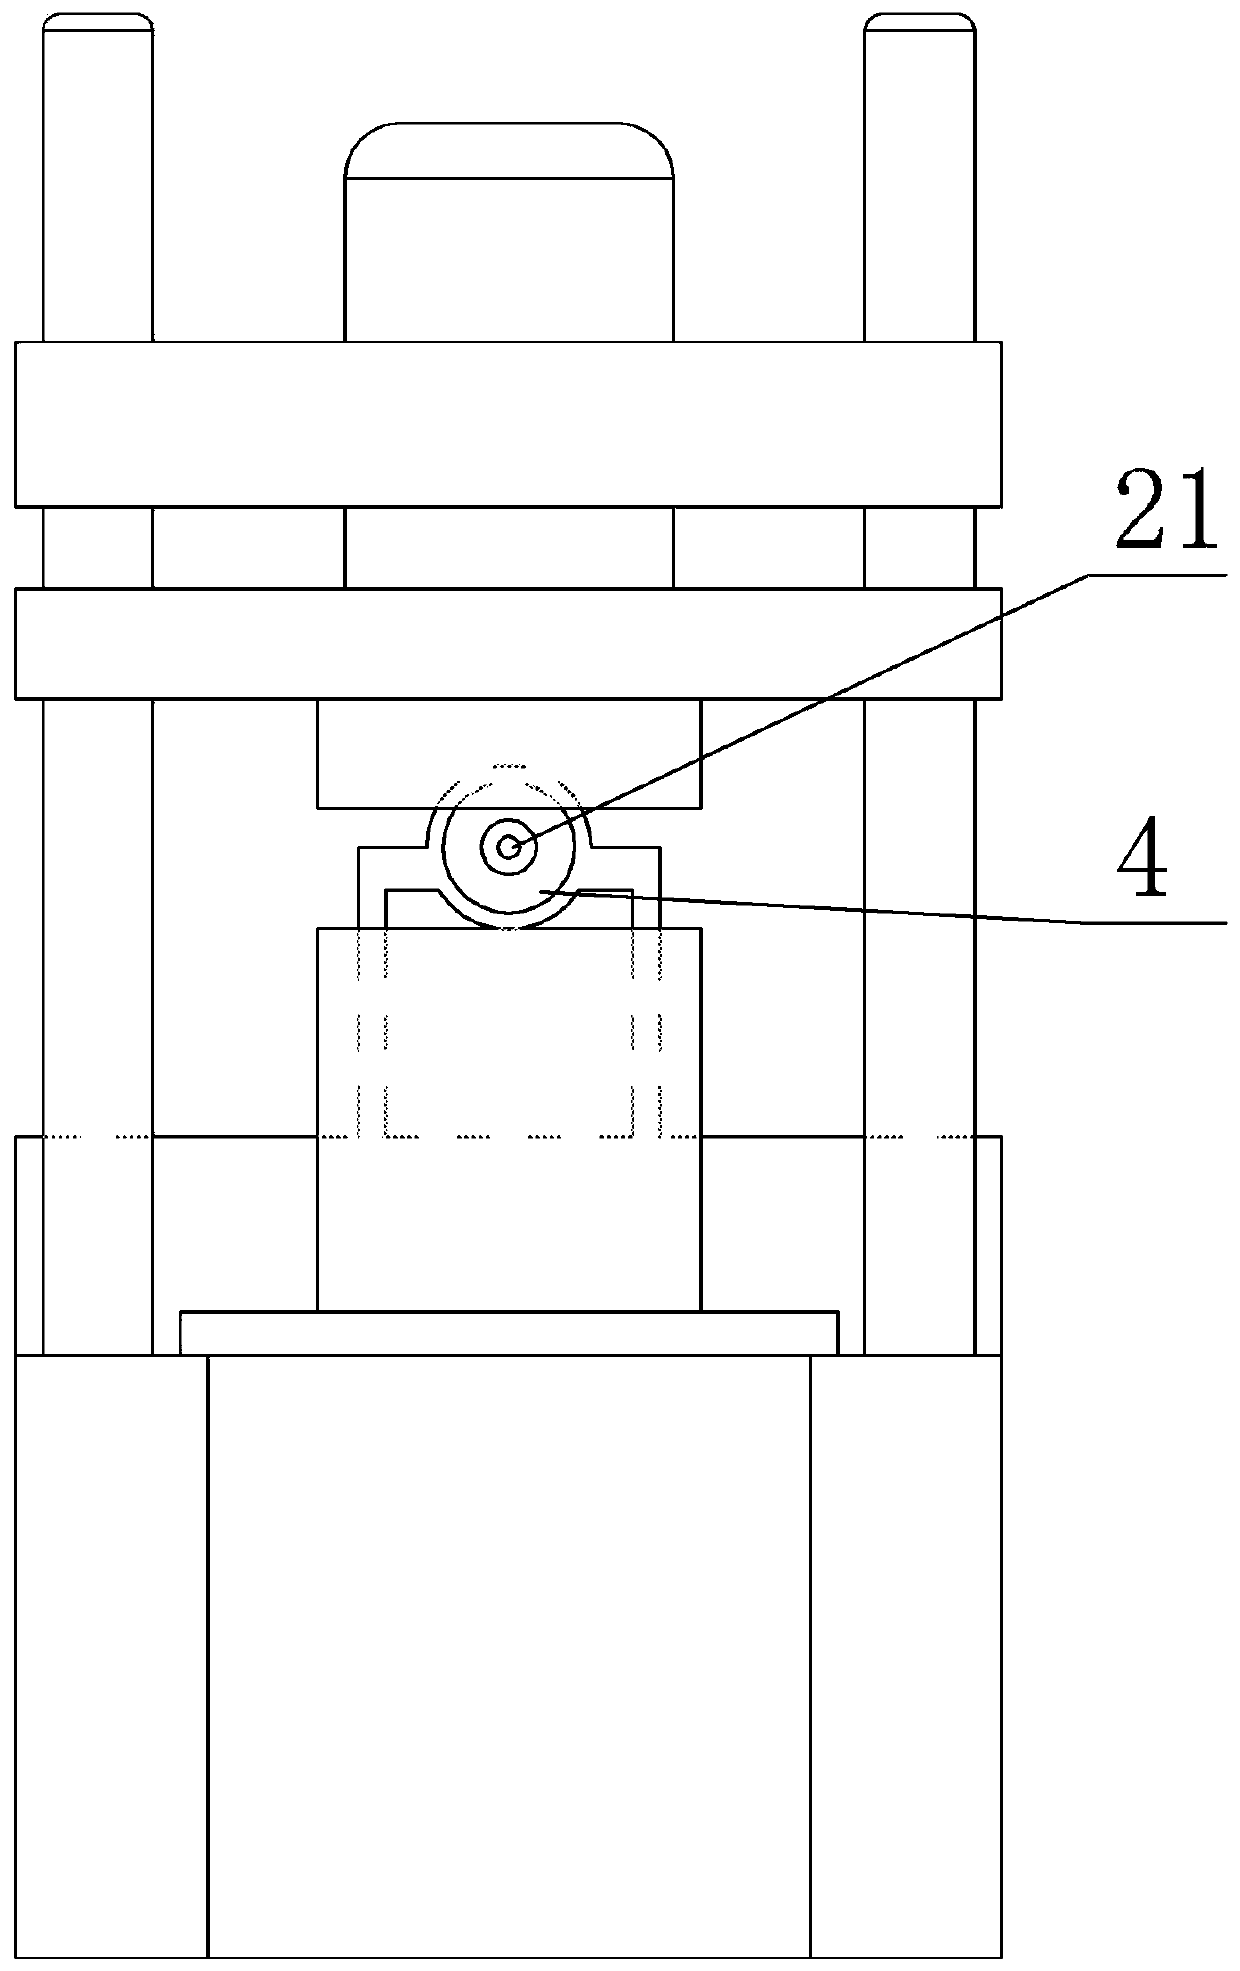 Grouping injection molding method